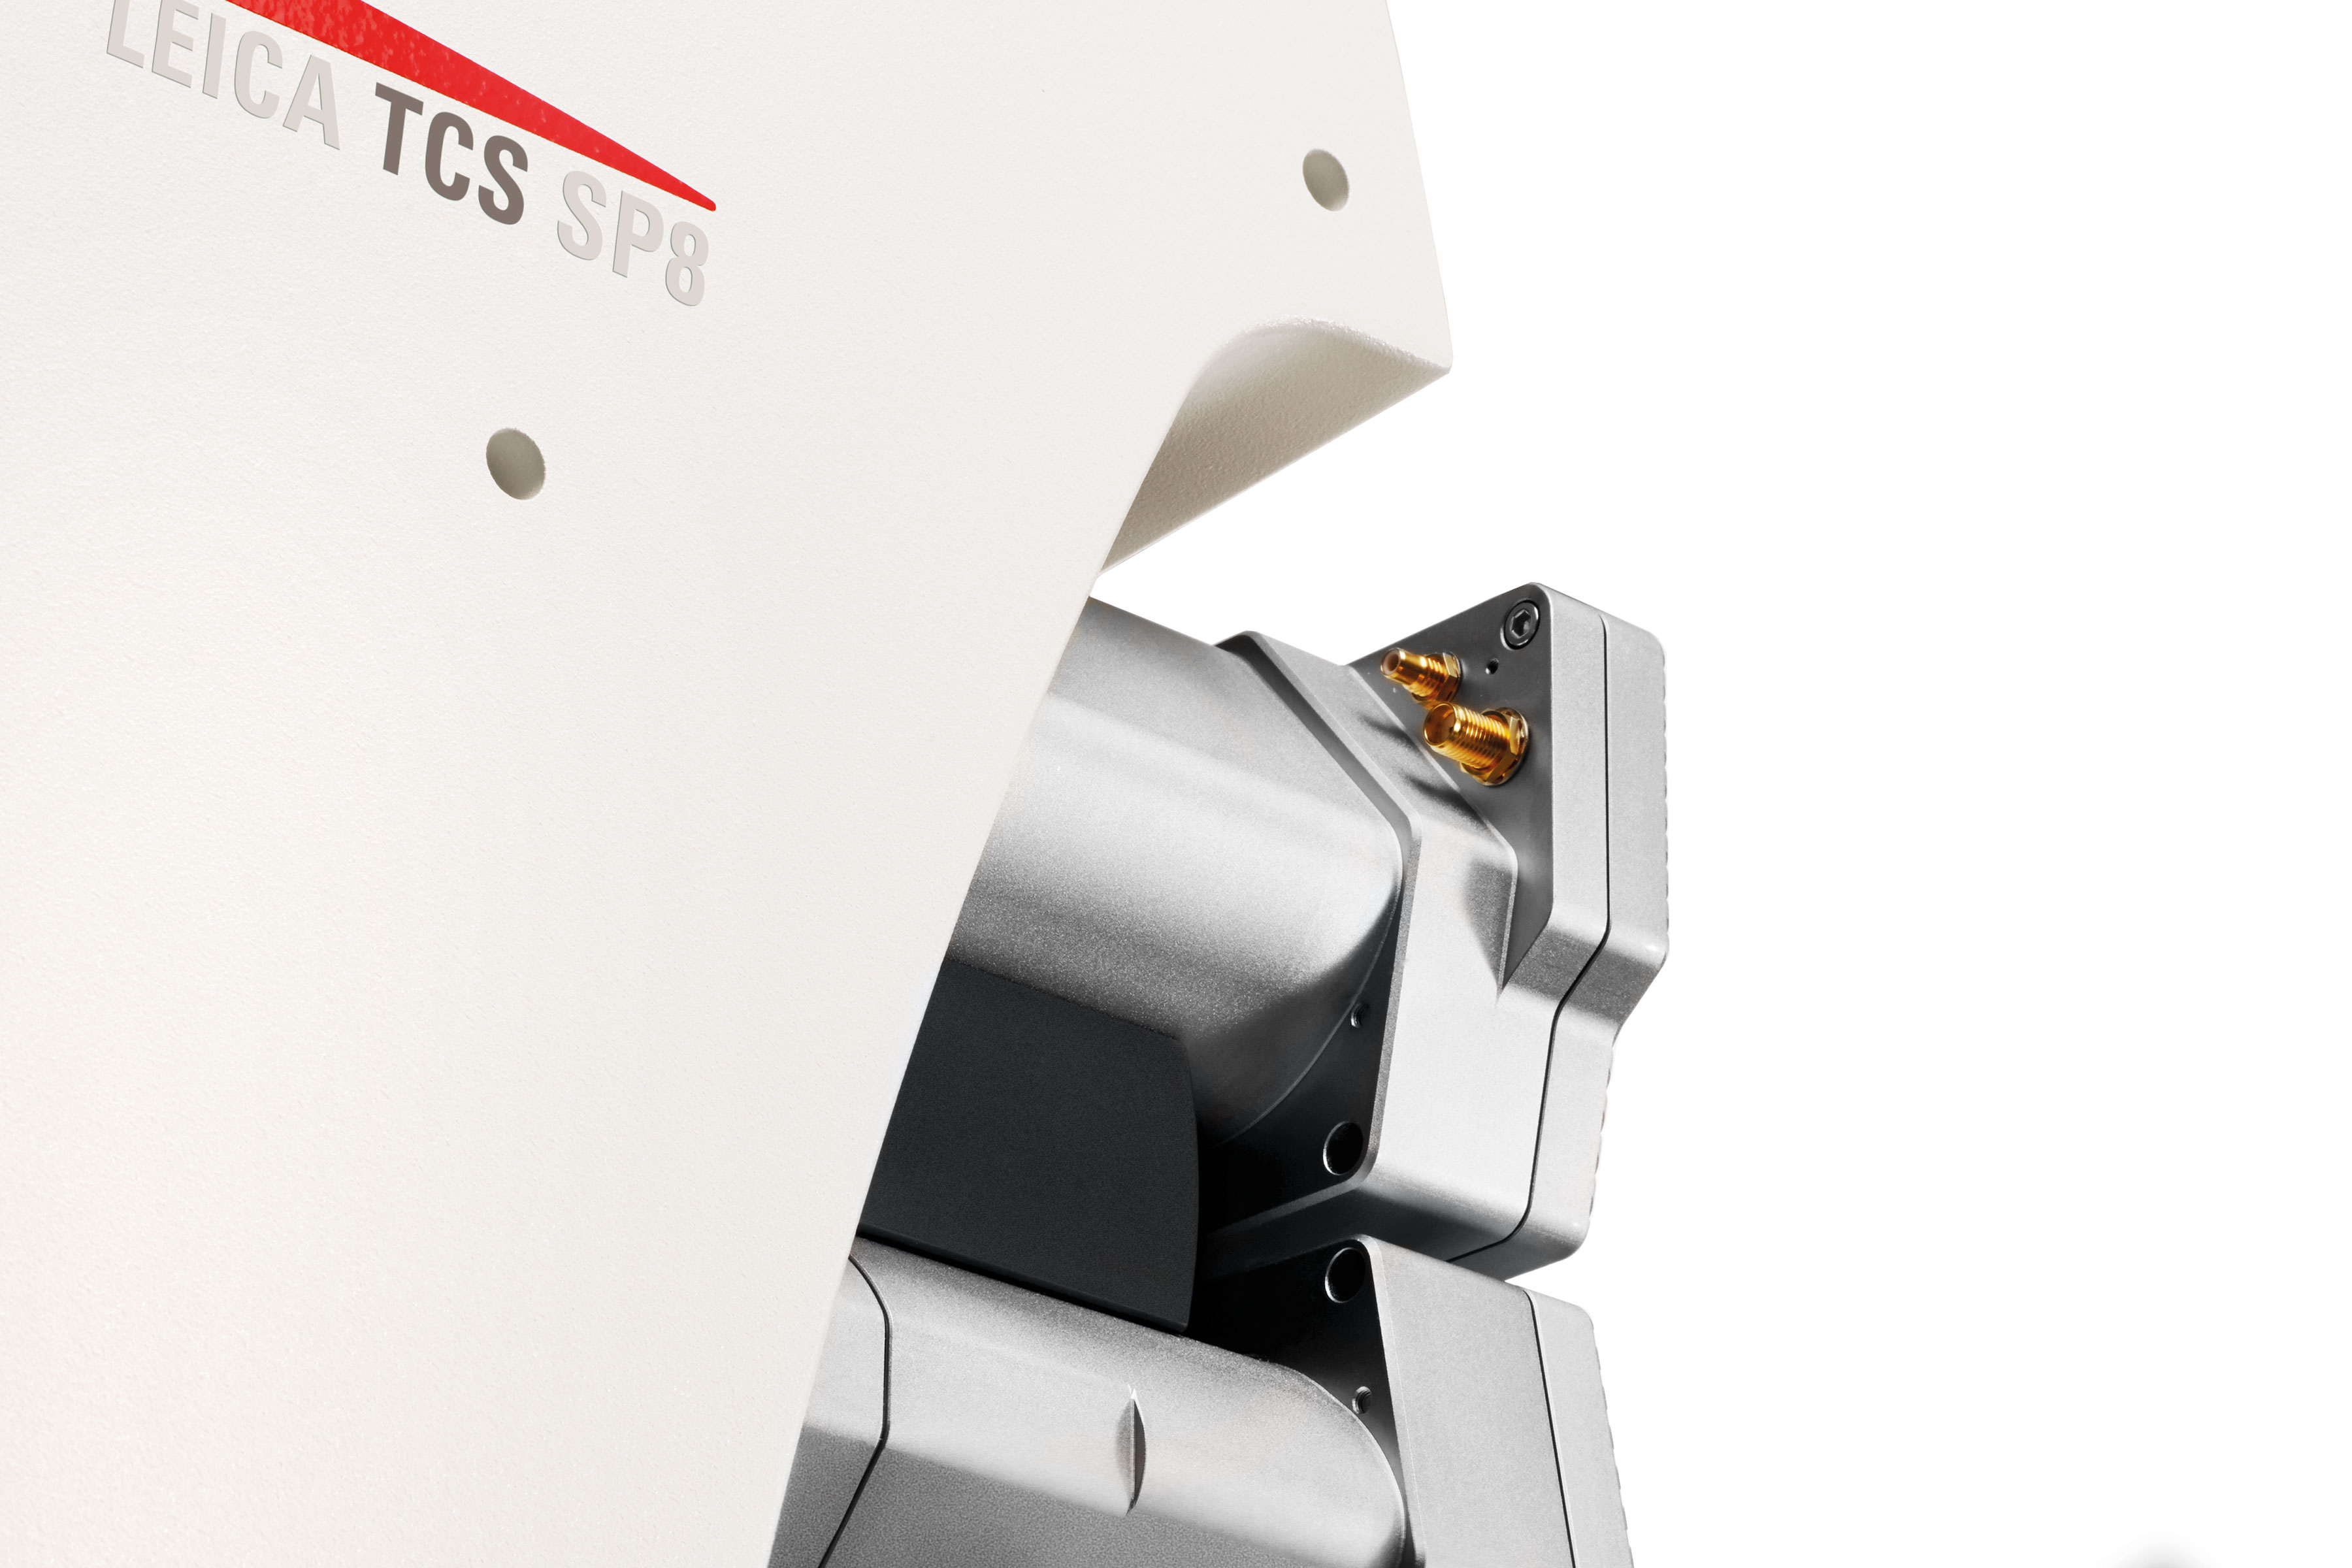 Leica TCS SP8-Confocal Laser Scanning Microscope